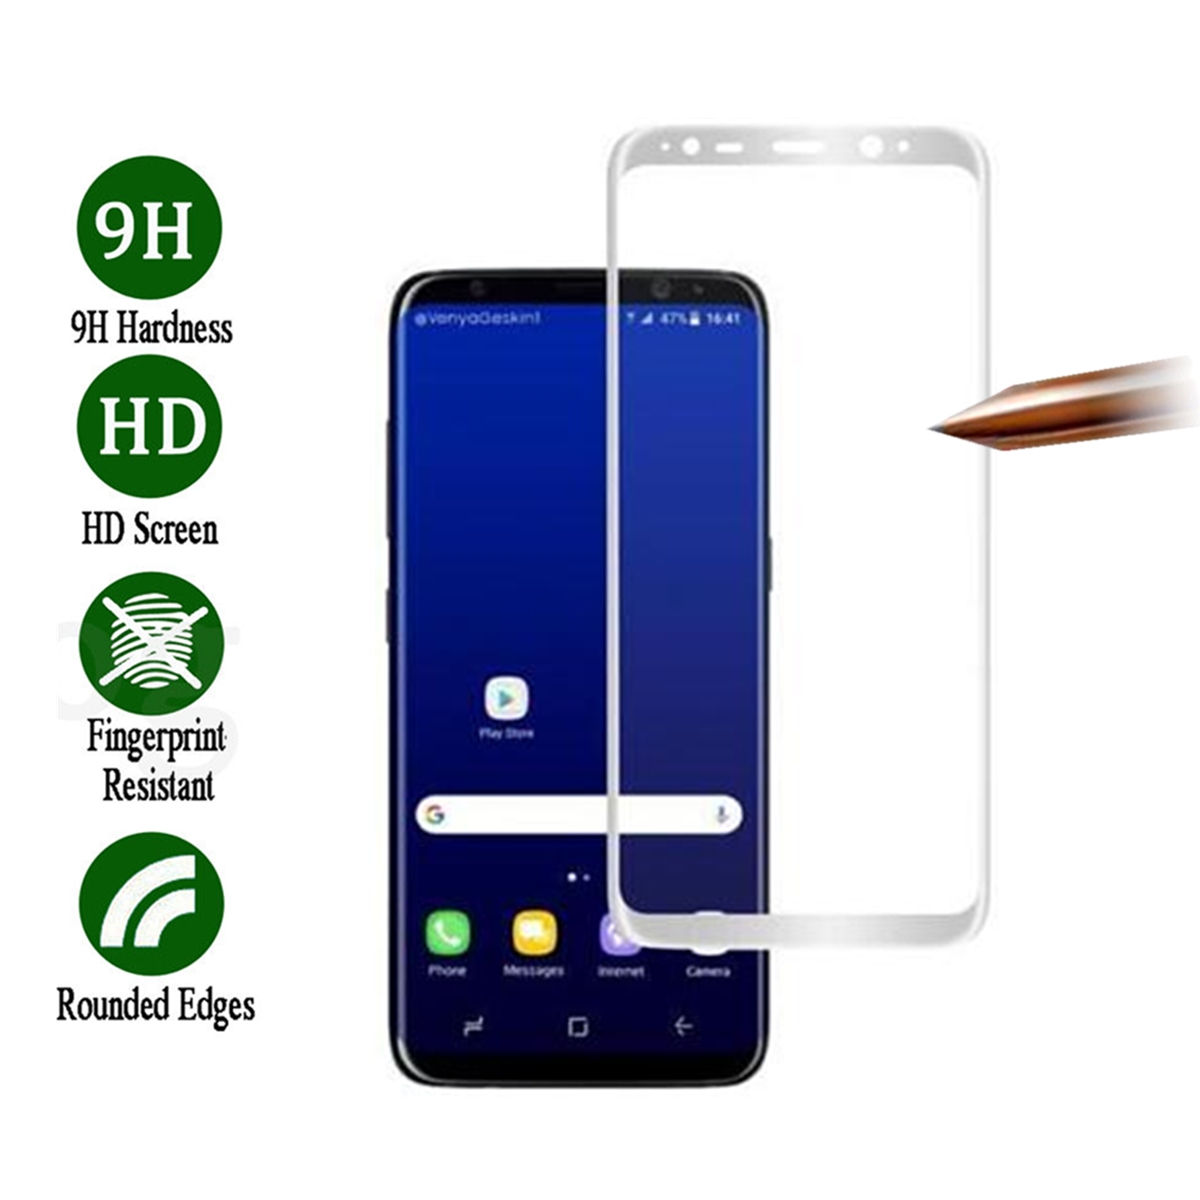 3D-Arc-Edge-026mm-Tempered-Glass-Silk-Screen-Rim-Screen-Protector-for-Samsung-Galaxy-S8-amp-S8-Plus-1149014